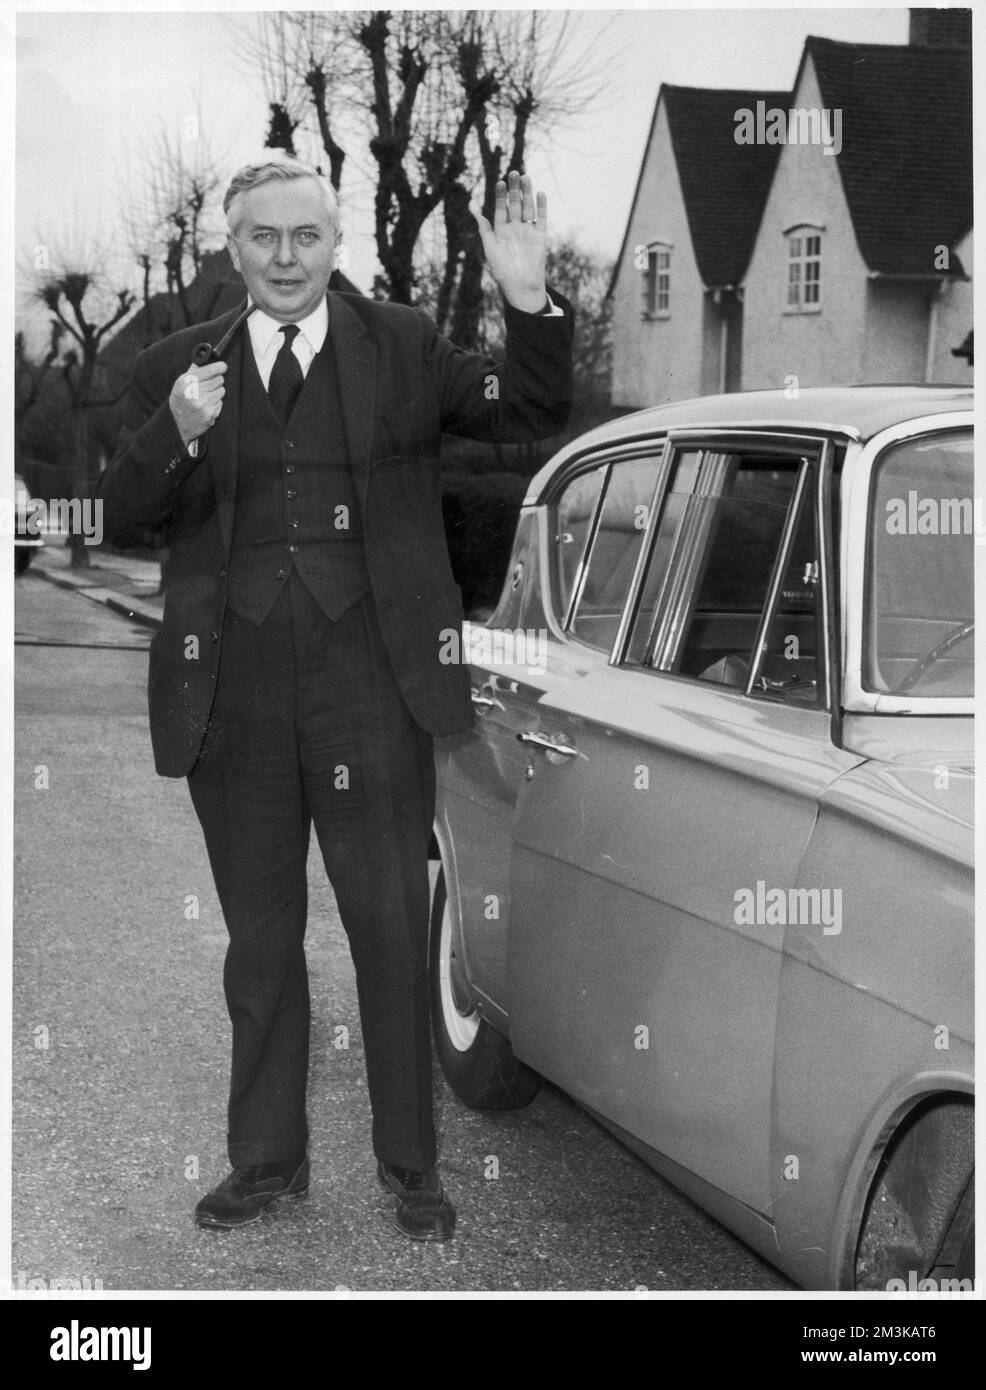 James Harold Wilson (1916-1995), Baron Wilson of Rievaulx, British Labour Prime Minister.  Party leader from 1963.  Prime Minister for two terms - from 1964-1970 and 1974-1976.  Pictured with his famous pipe while leader of the opposition, outside his home in Hampstead Garden Suburb following significant Labour gains during the Greater London Council elections of 1964.     Date: 1964 Stock Photo